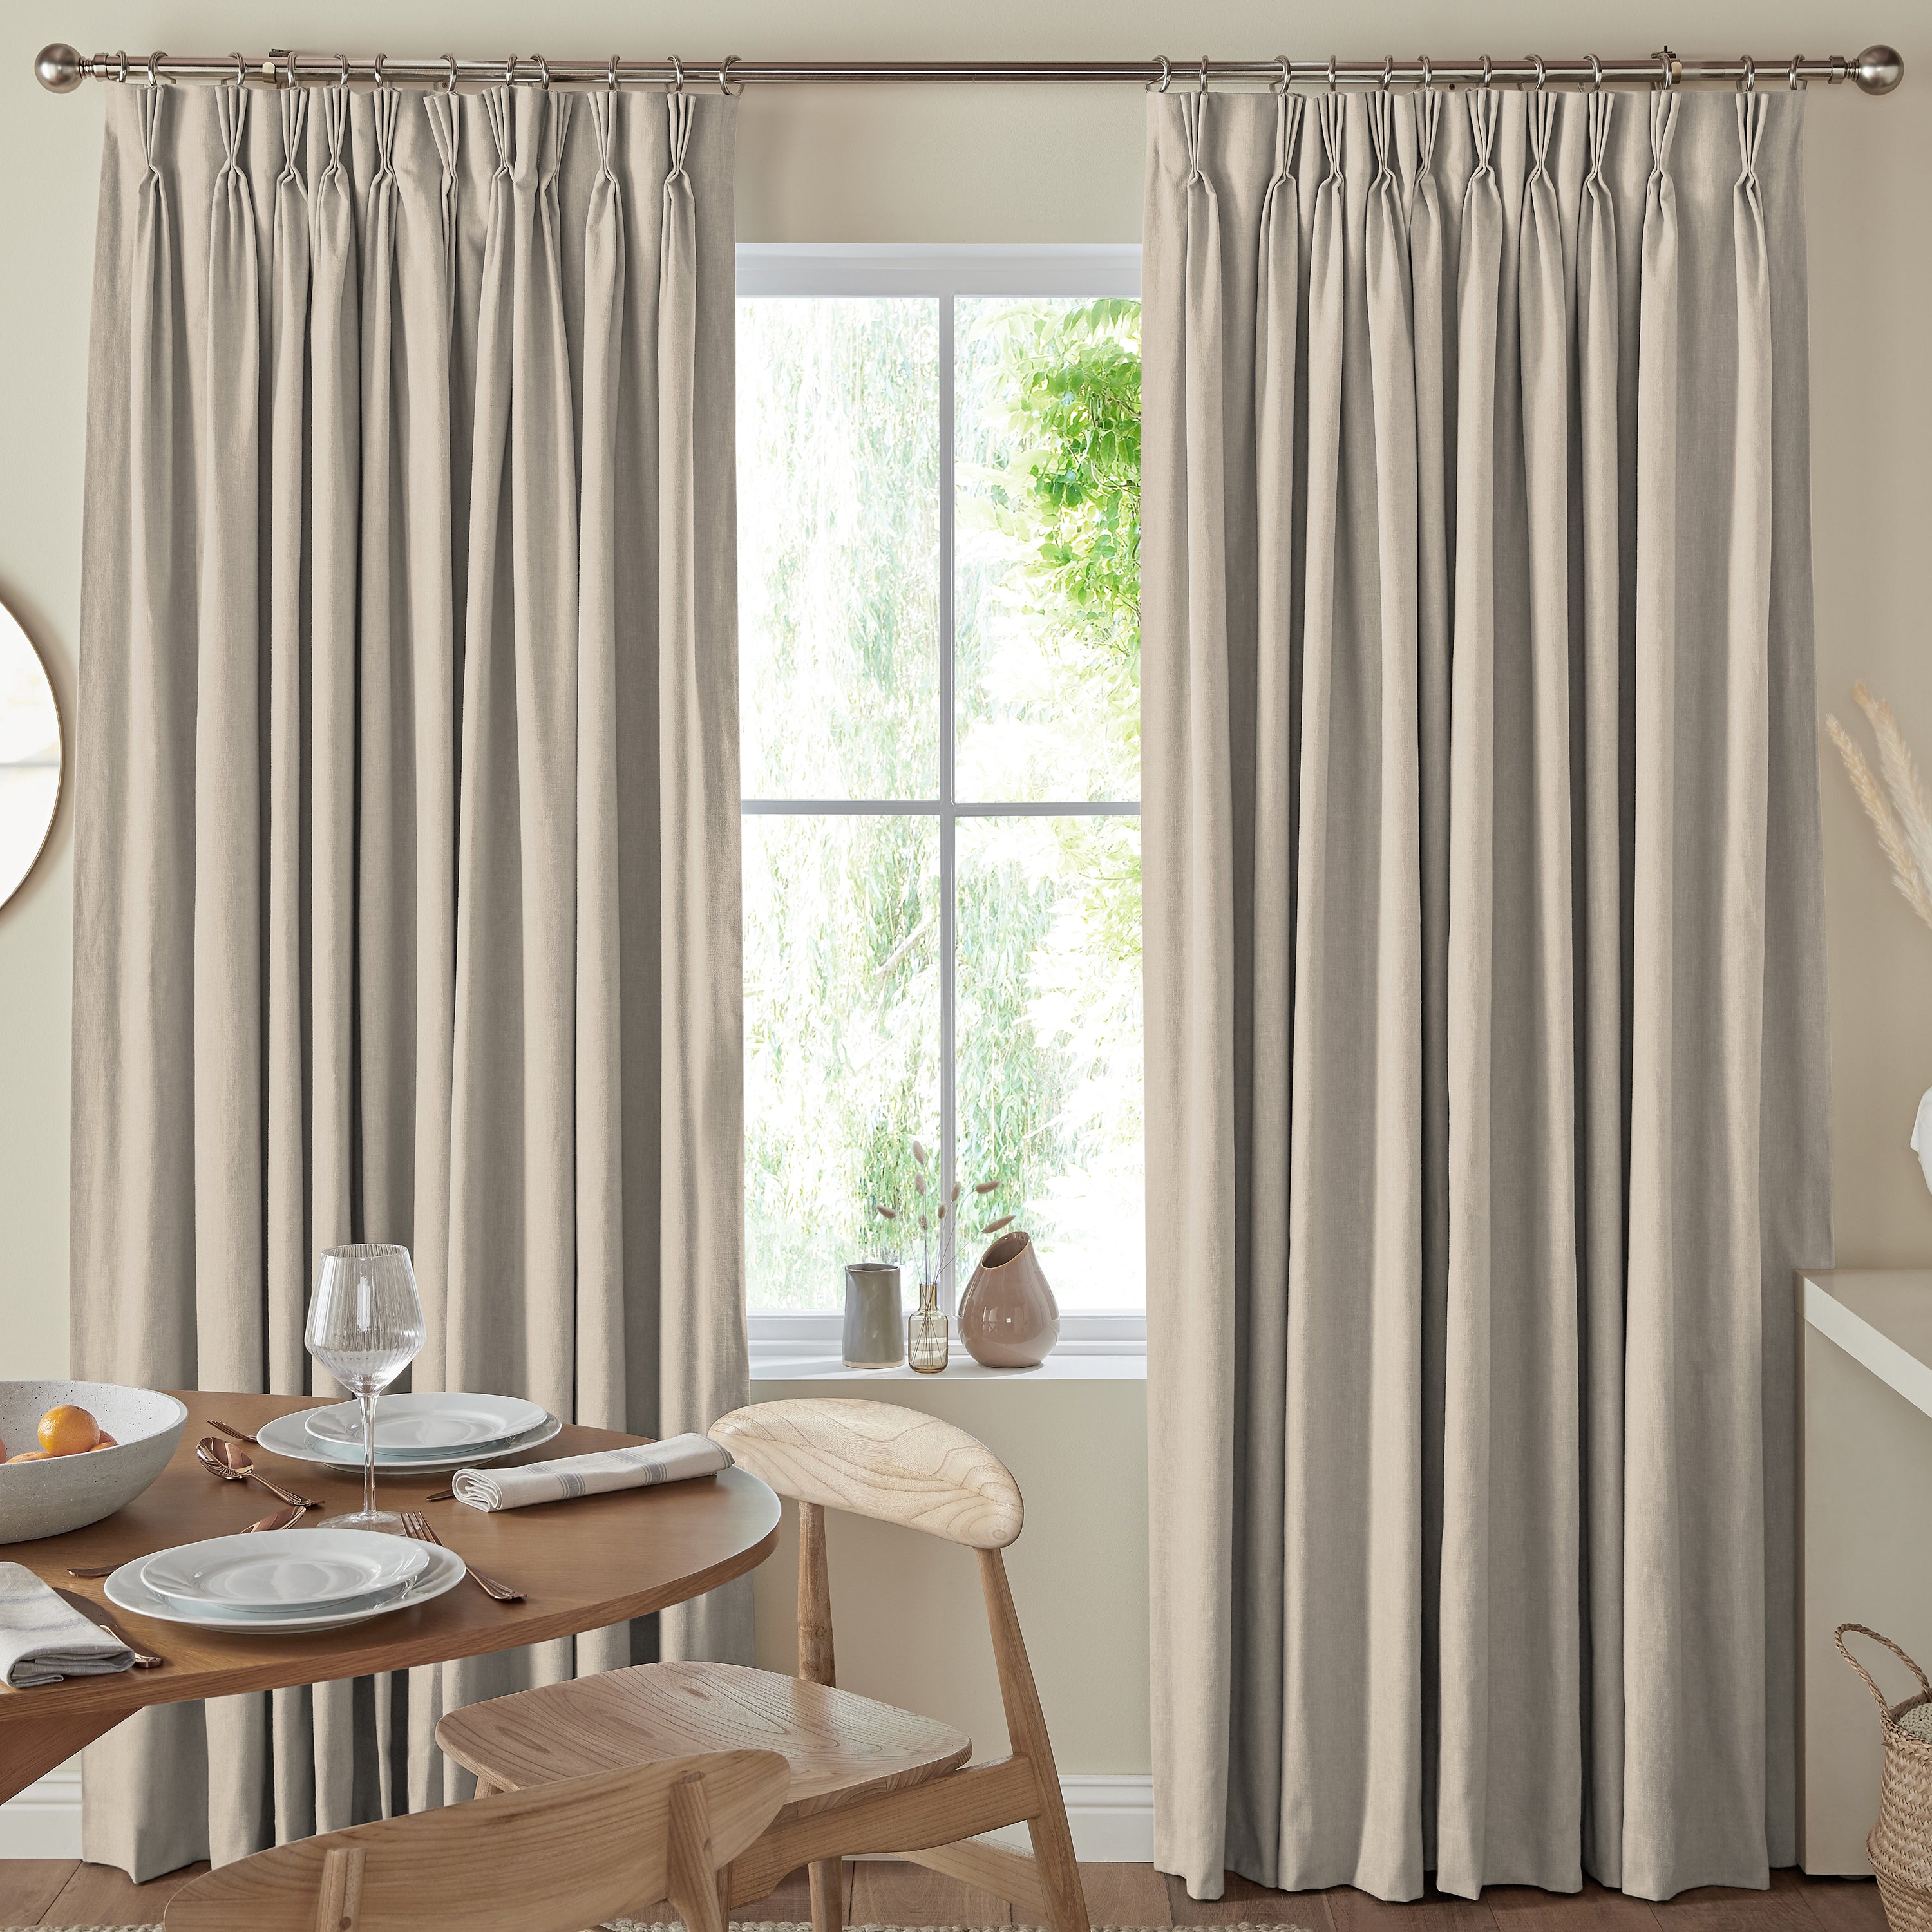 Lavery Made To Measure Curtains in Hessian | 96% Brand Rating | Terrys